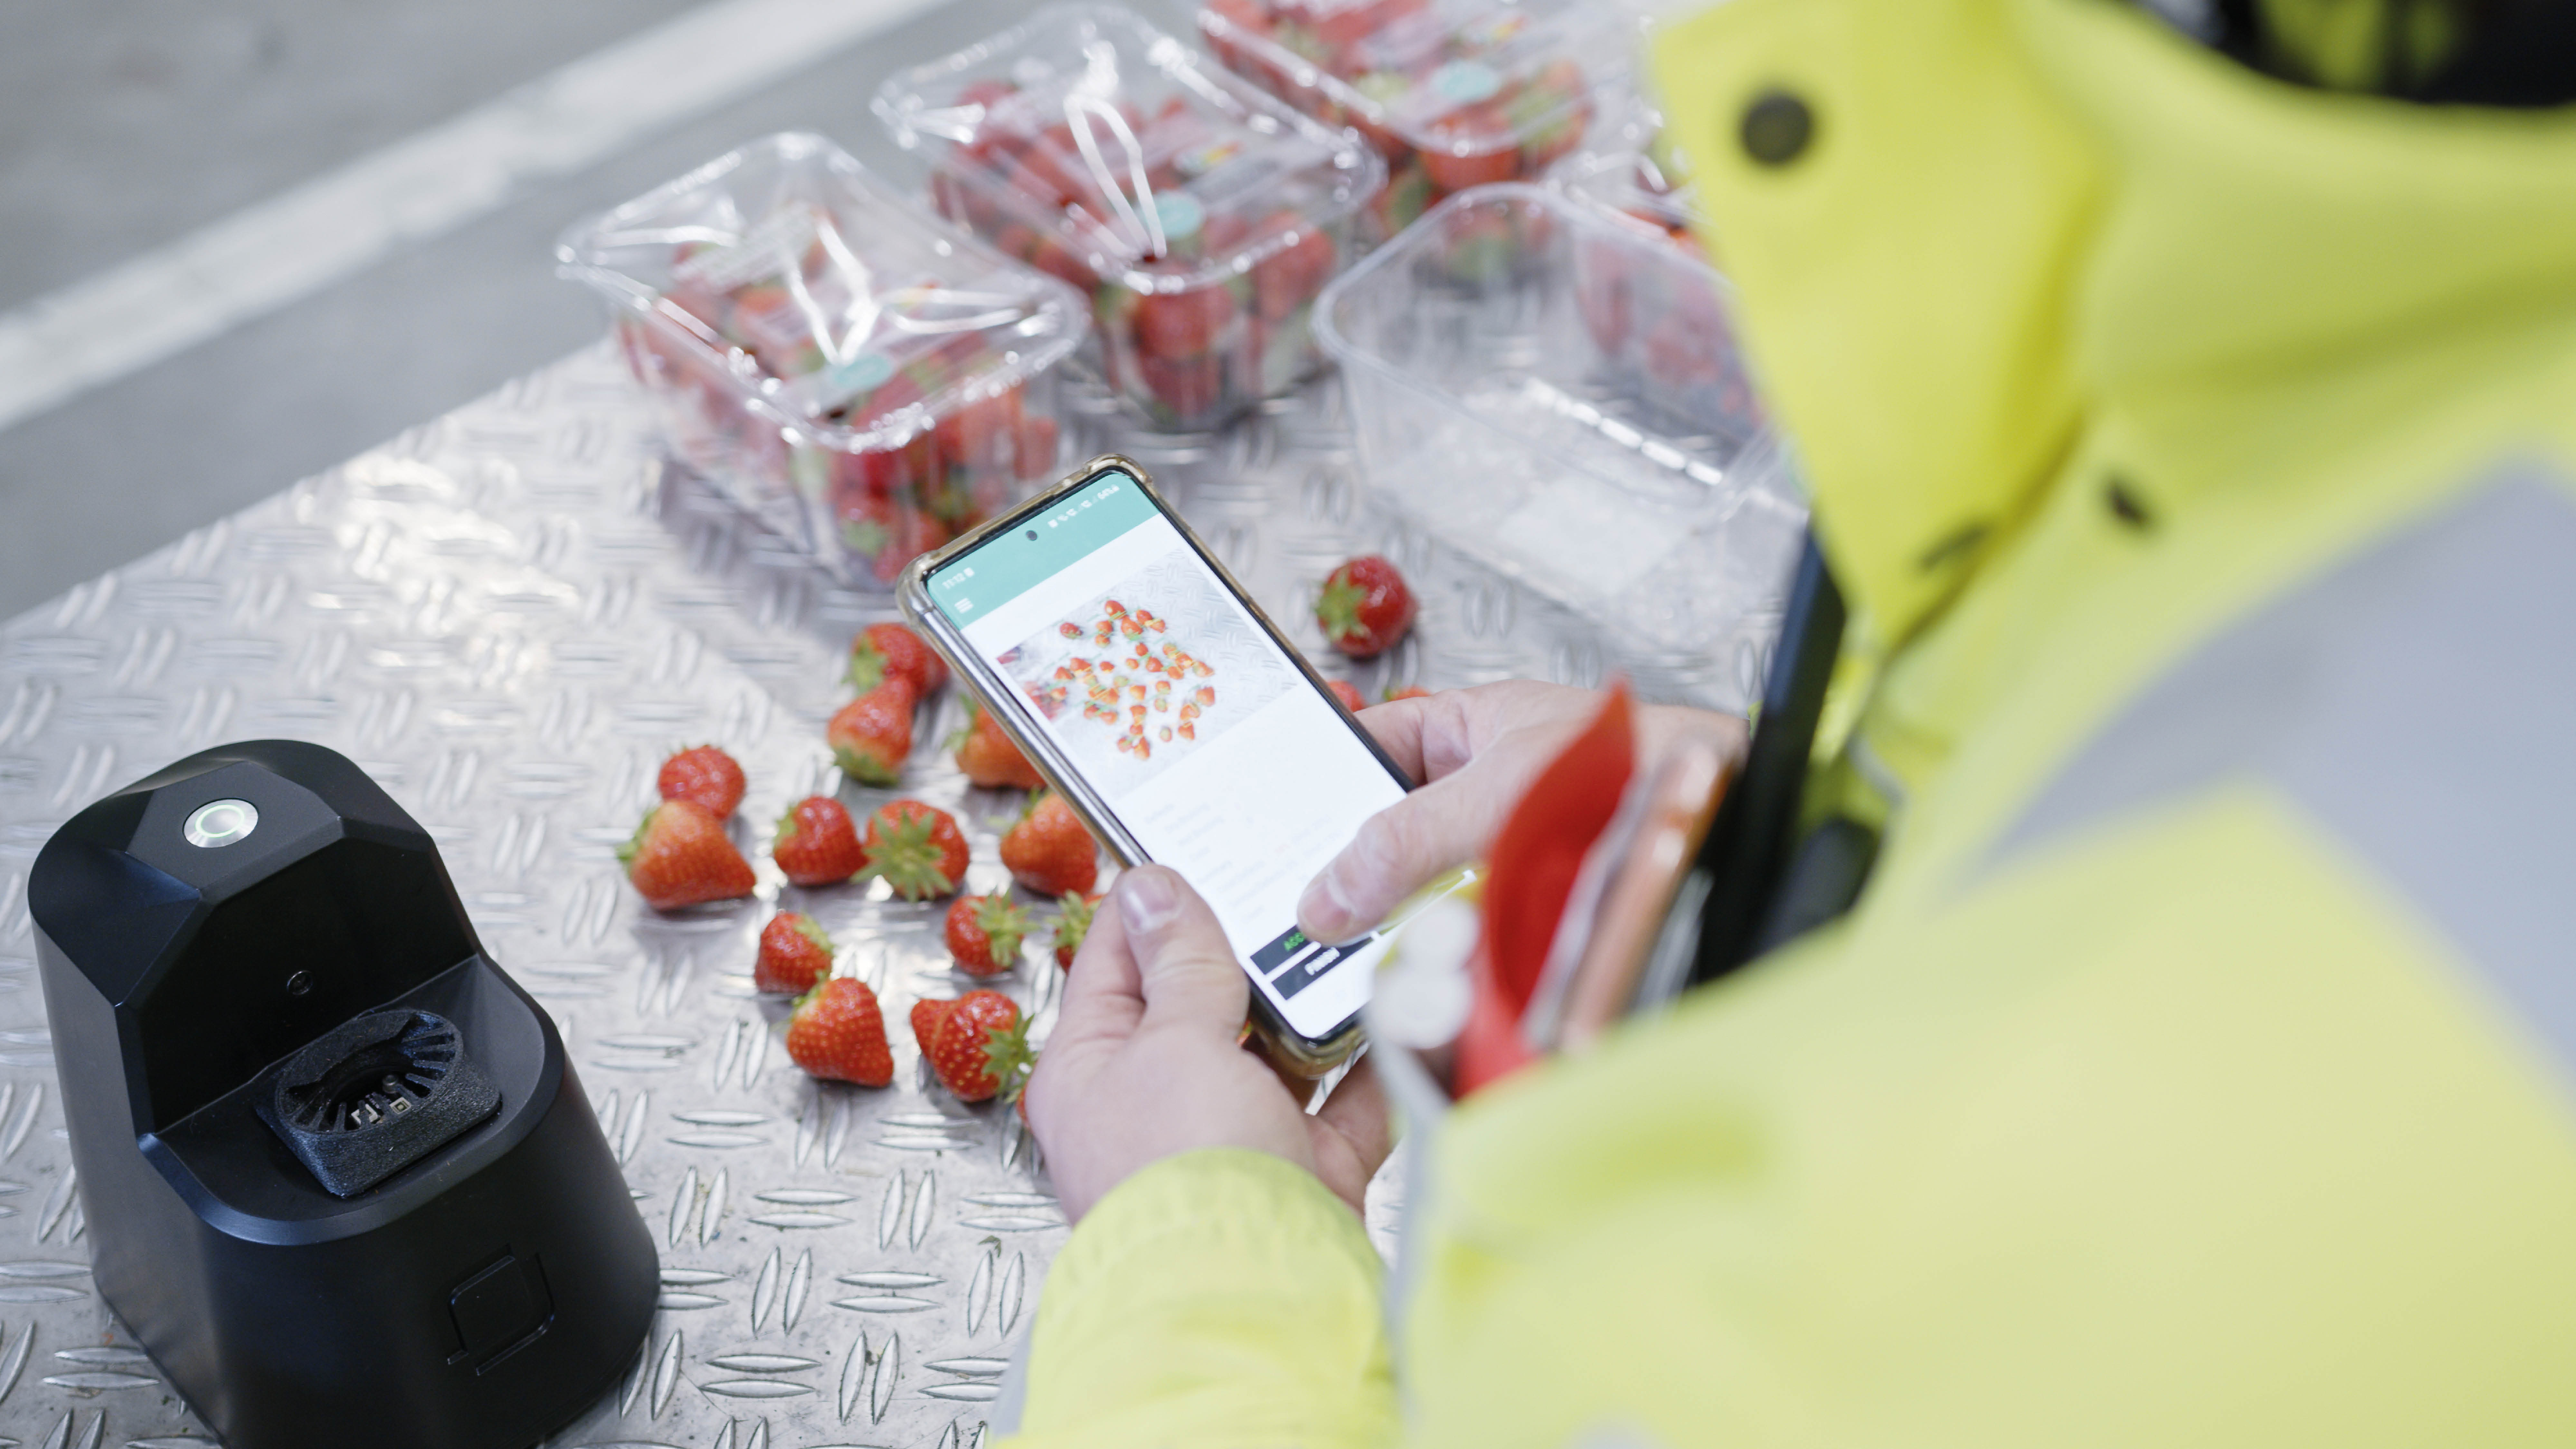 OneThird Ripeness Checker for Strawberries in use at a Produce Supply Chain Distribution Center